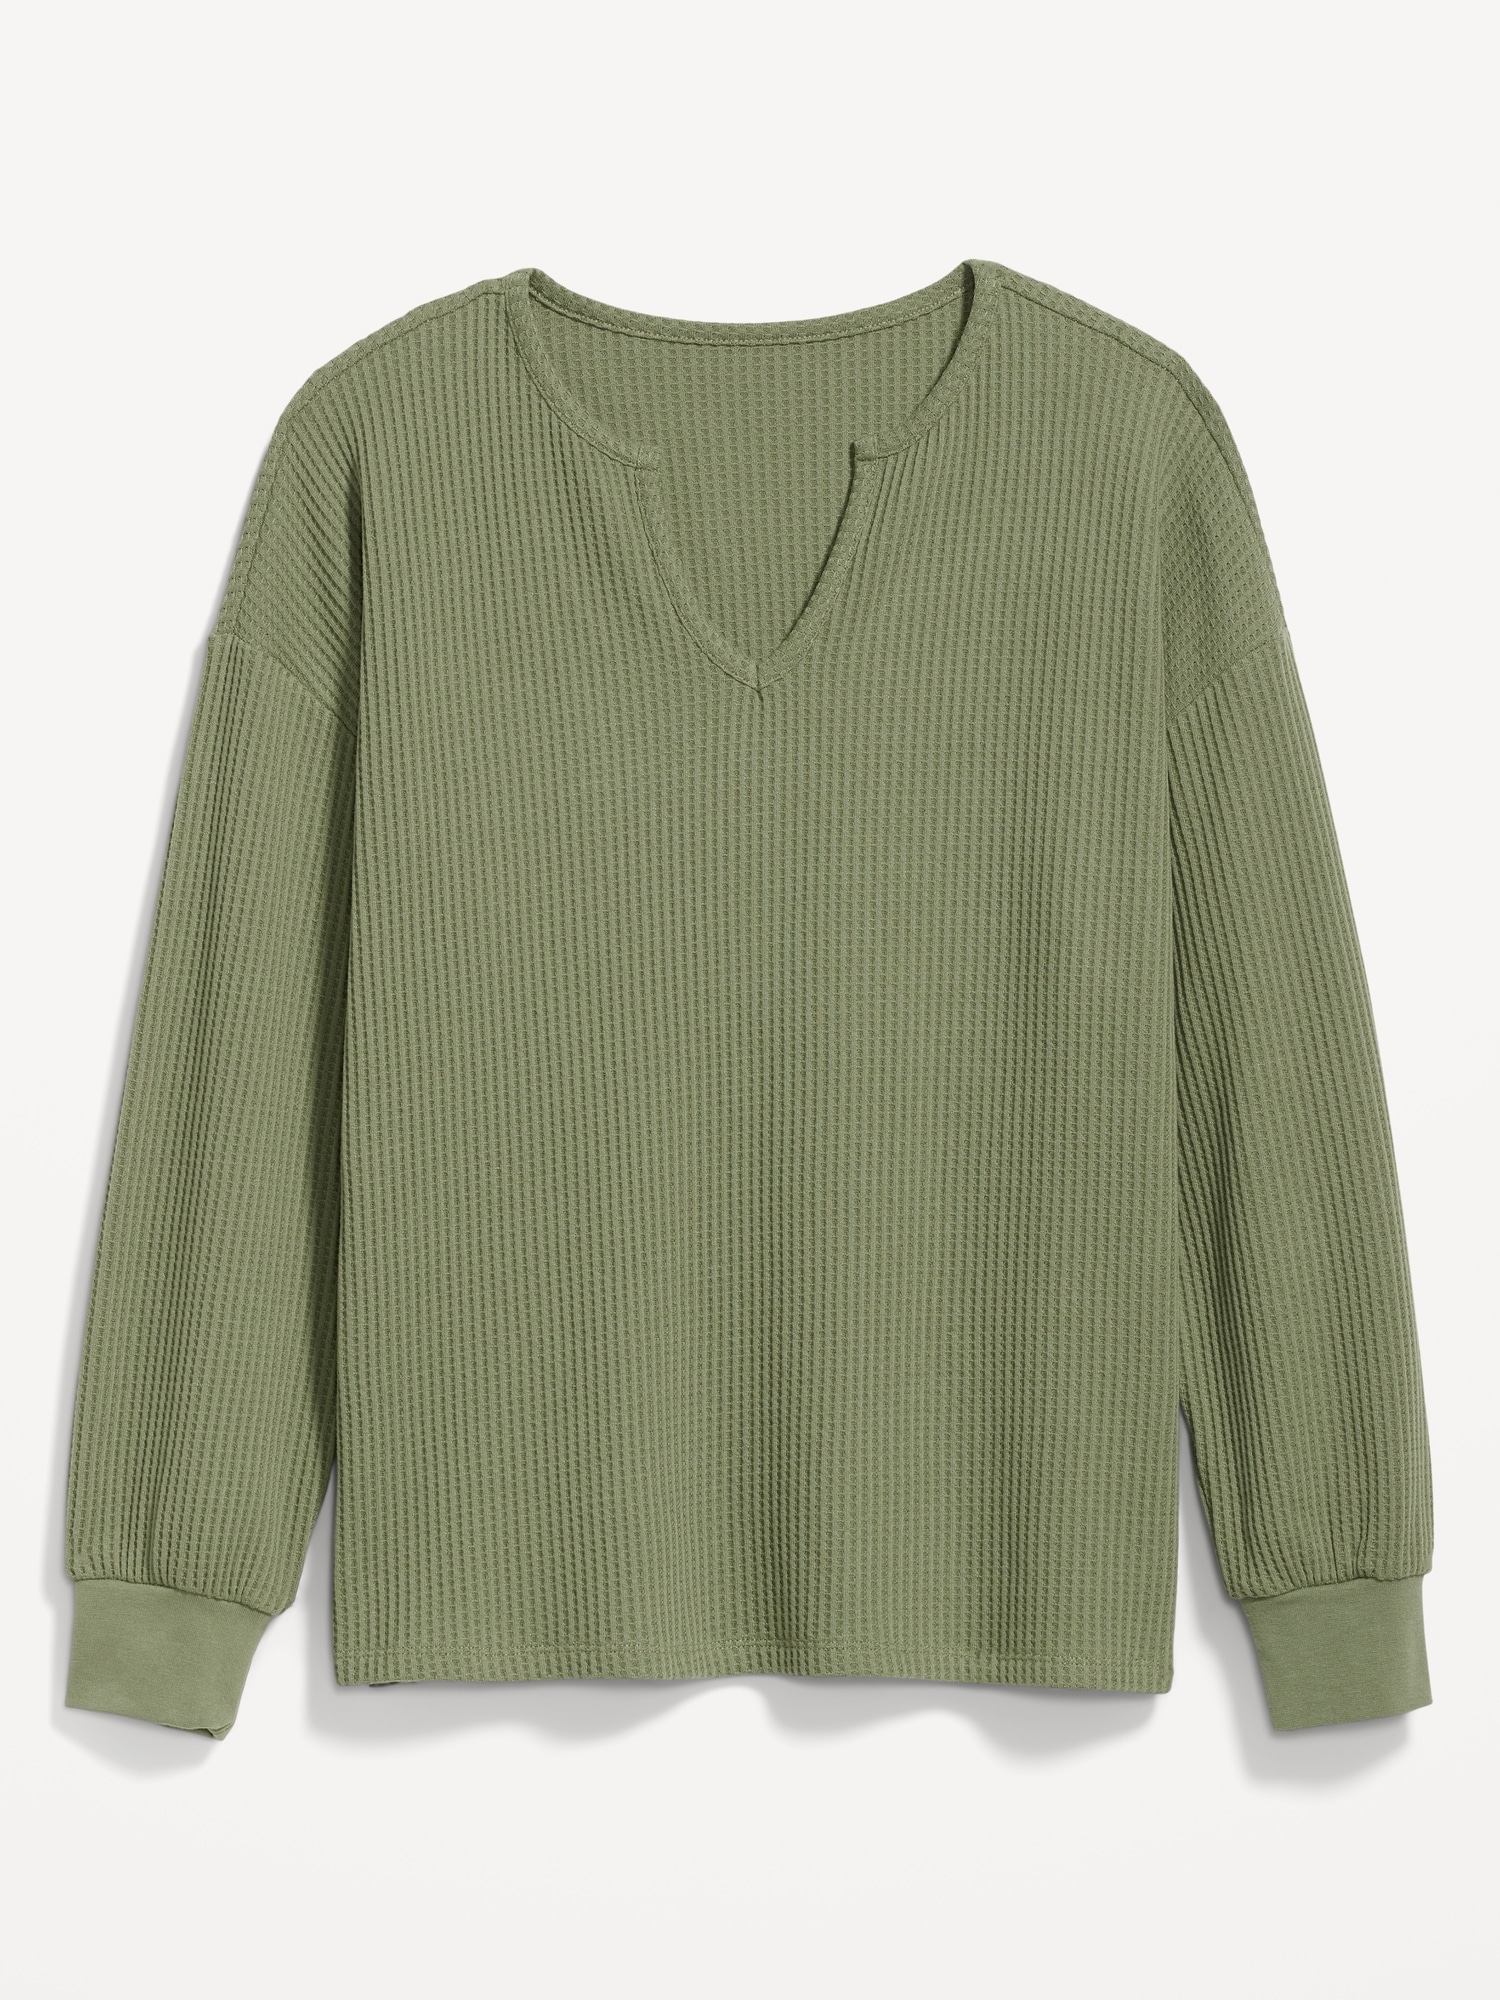 CHASER Sage Green Waffle-Knit Button-Accent Sleeve Women's